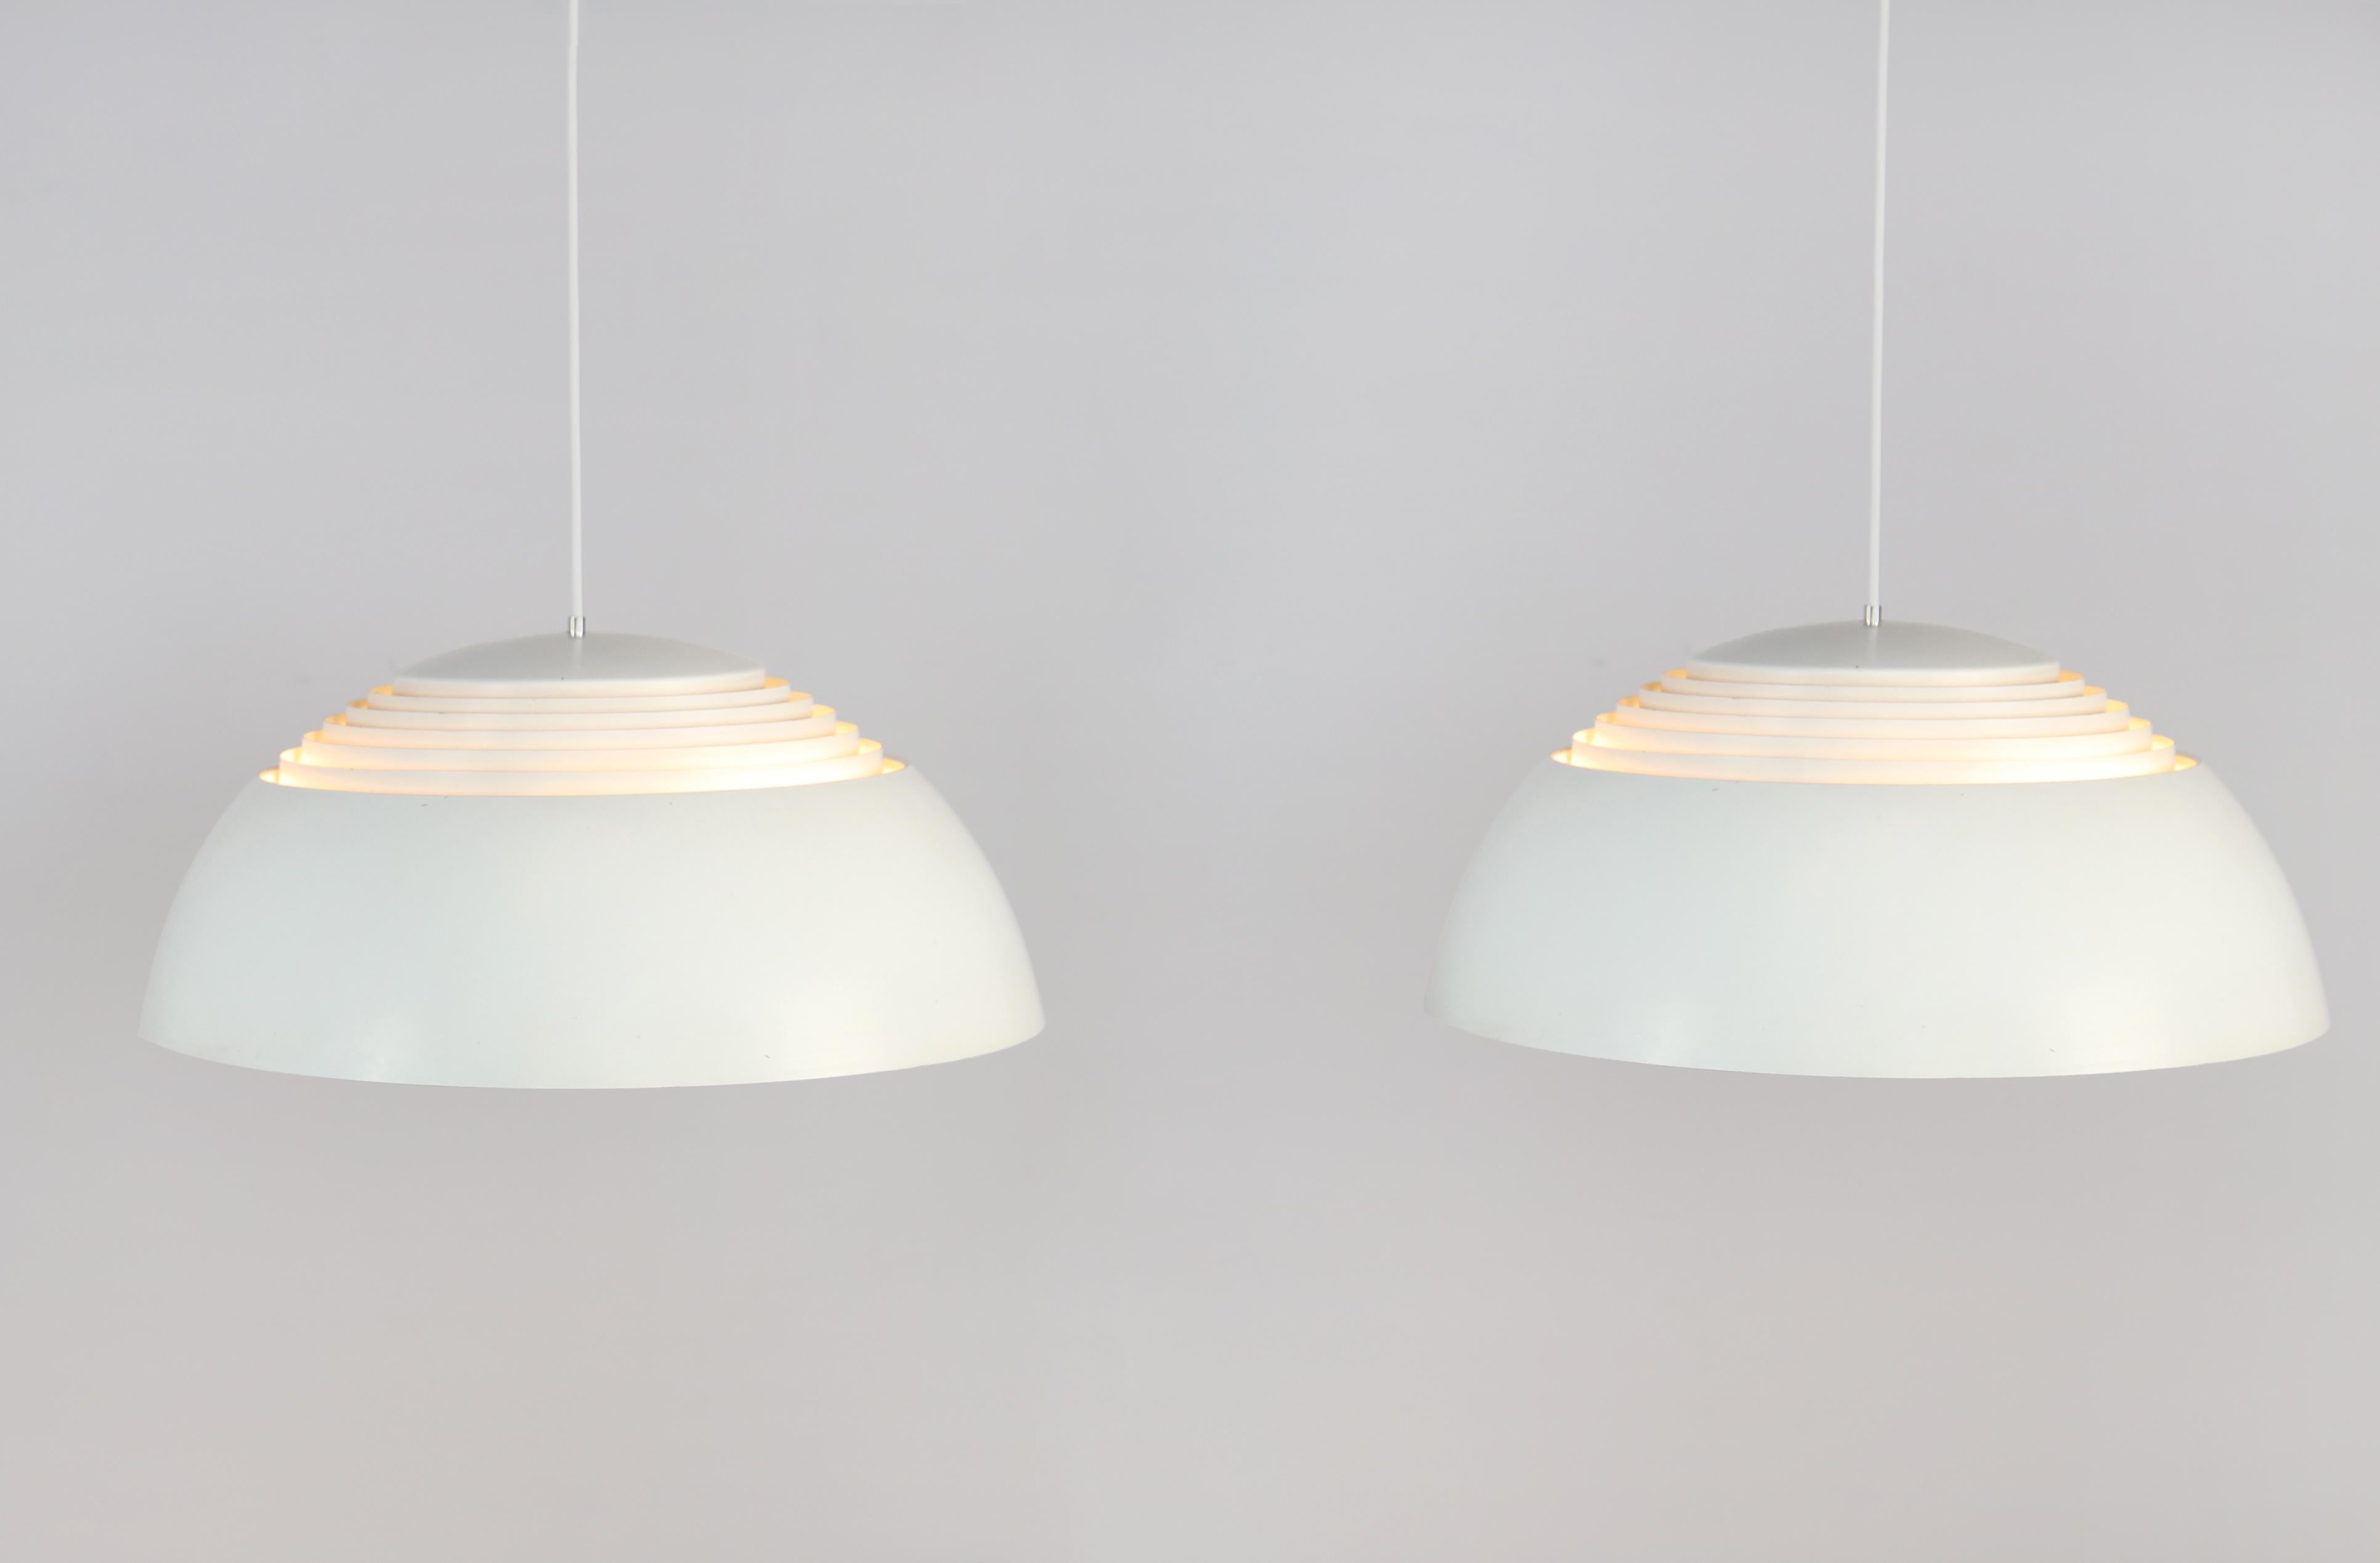 These AJ Royal lamps were designed by Arne Jacobsen for Louis Poulsen in the 1960s for the Royal SAS hotel in Copenhagen. The nice thing about these lamps is that they shine both light upwards and downwards due to the design of the lamp, which uses